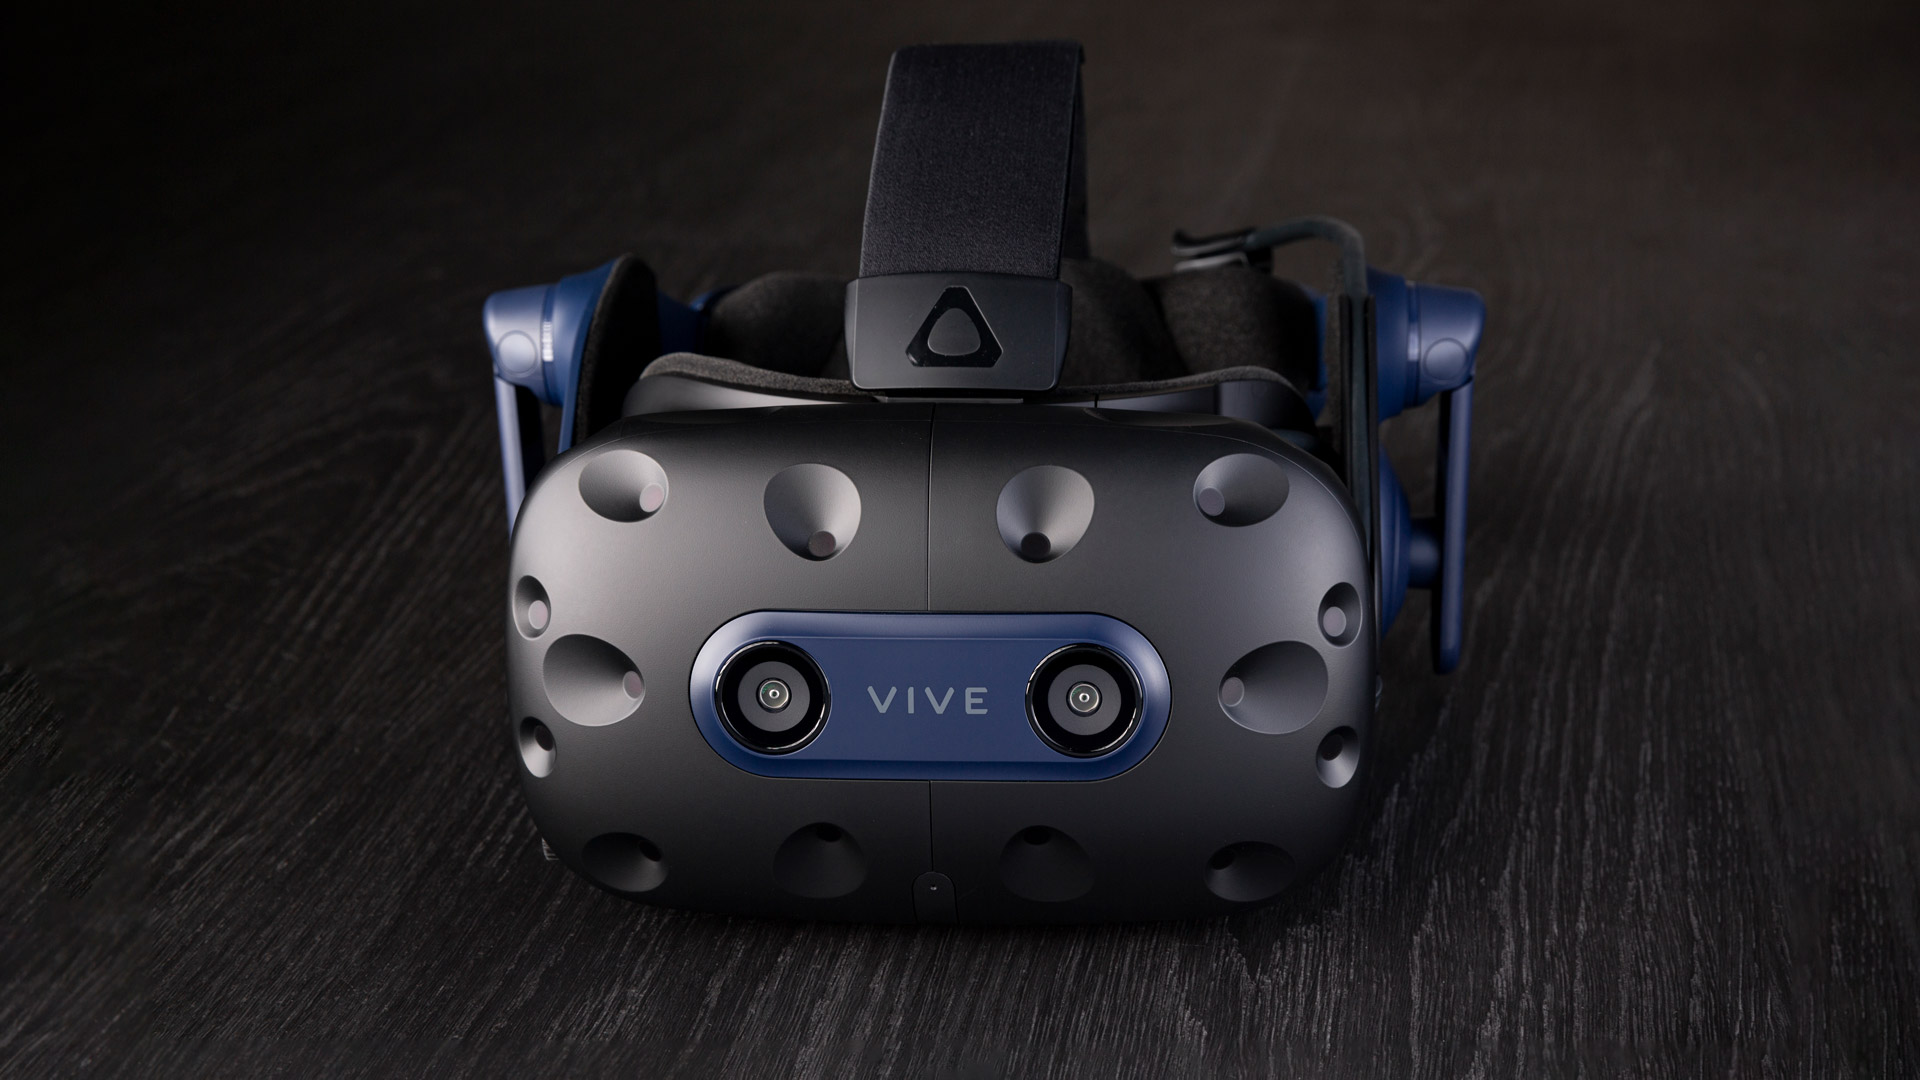 Vive Pro 2 With Index Controllers Is $100 Less Than HTC's Full Kit